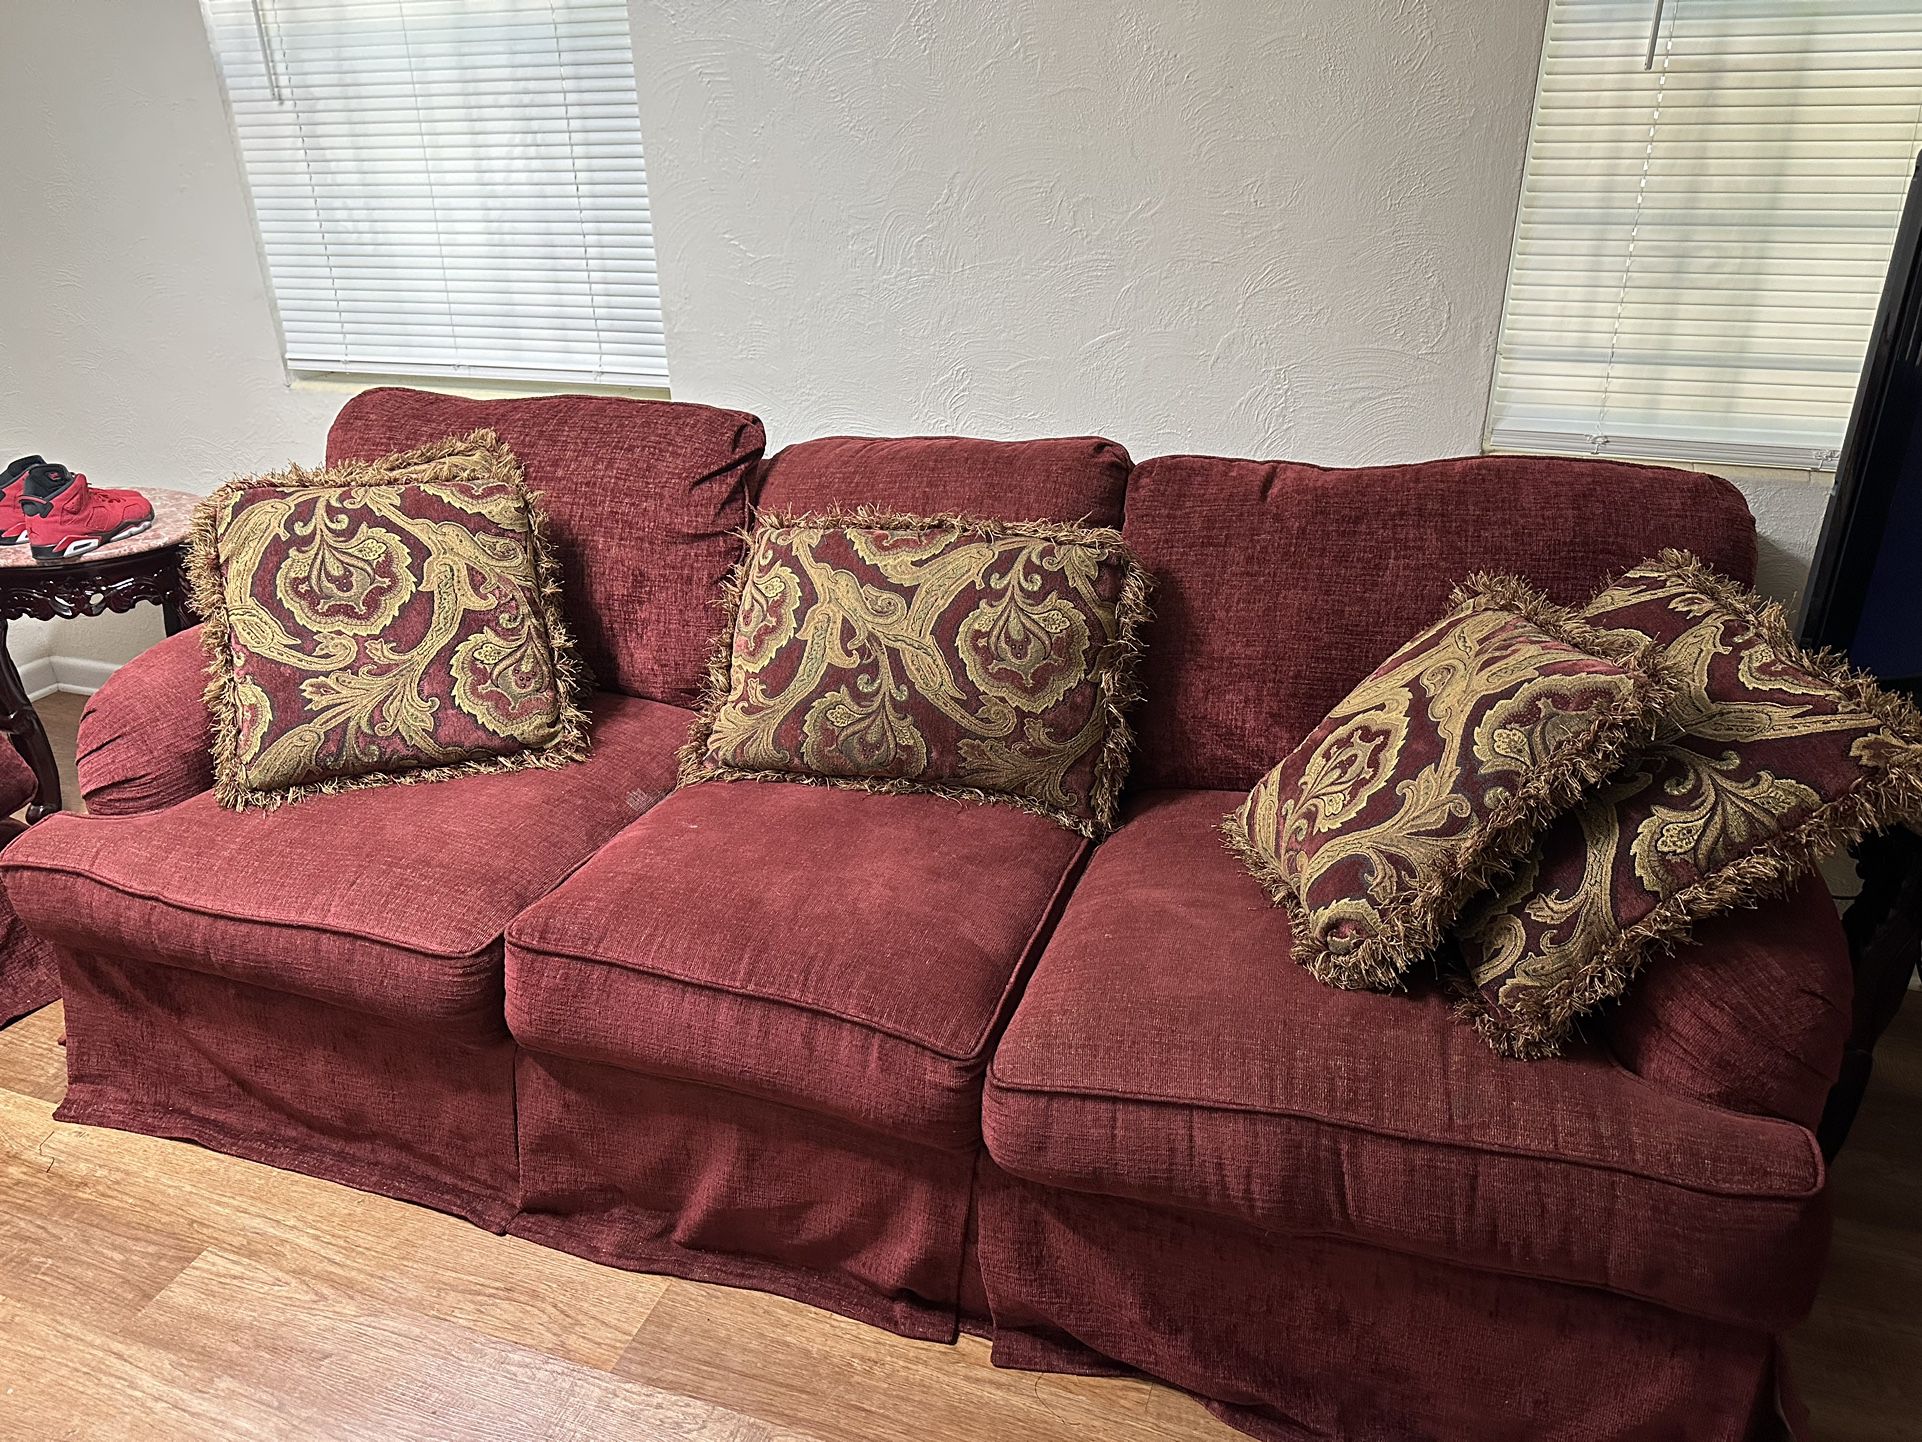 Red Couch set with Pillows 